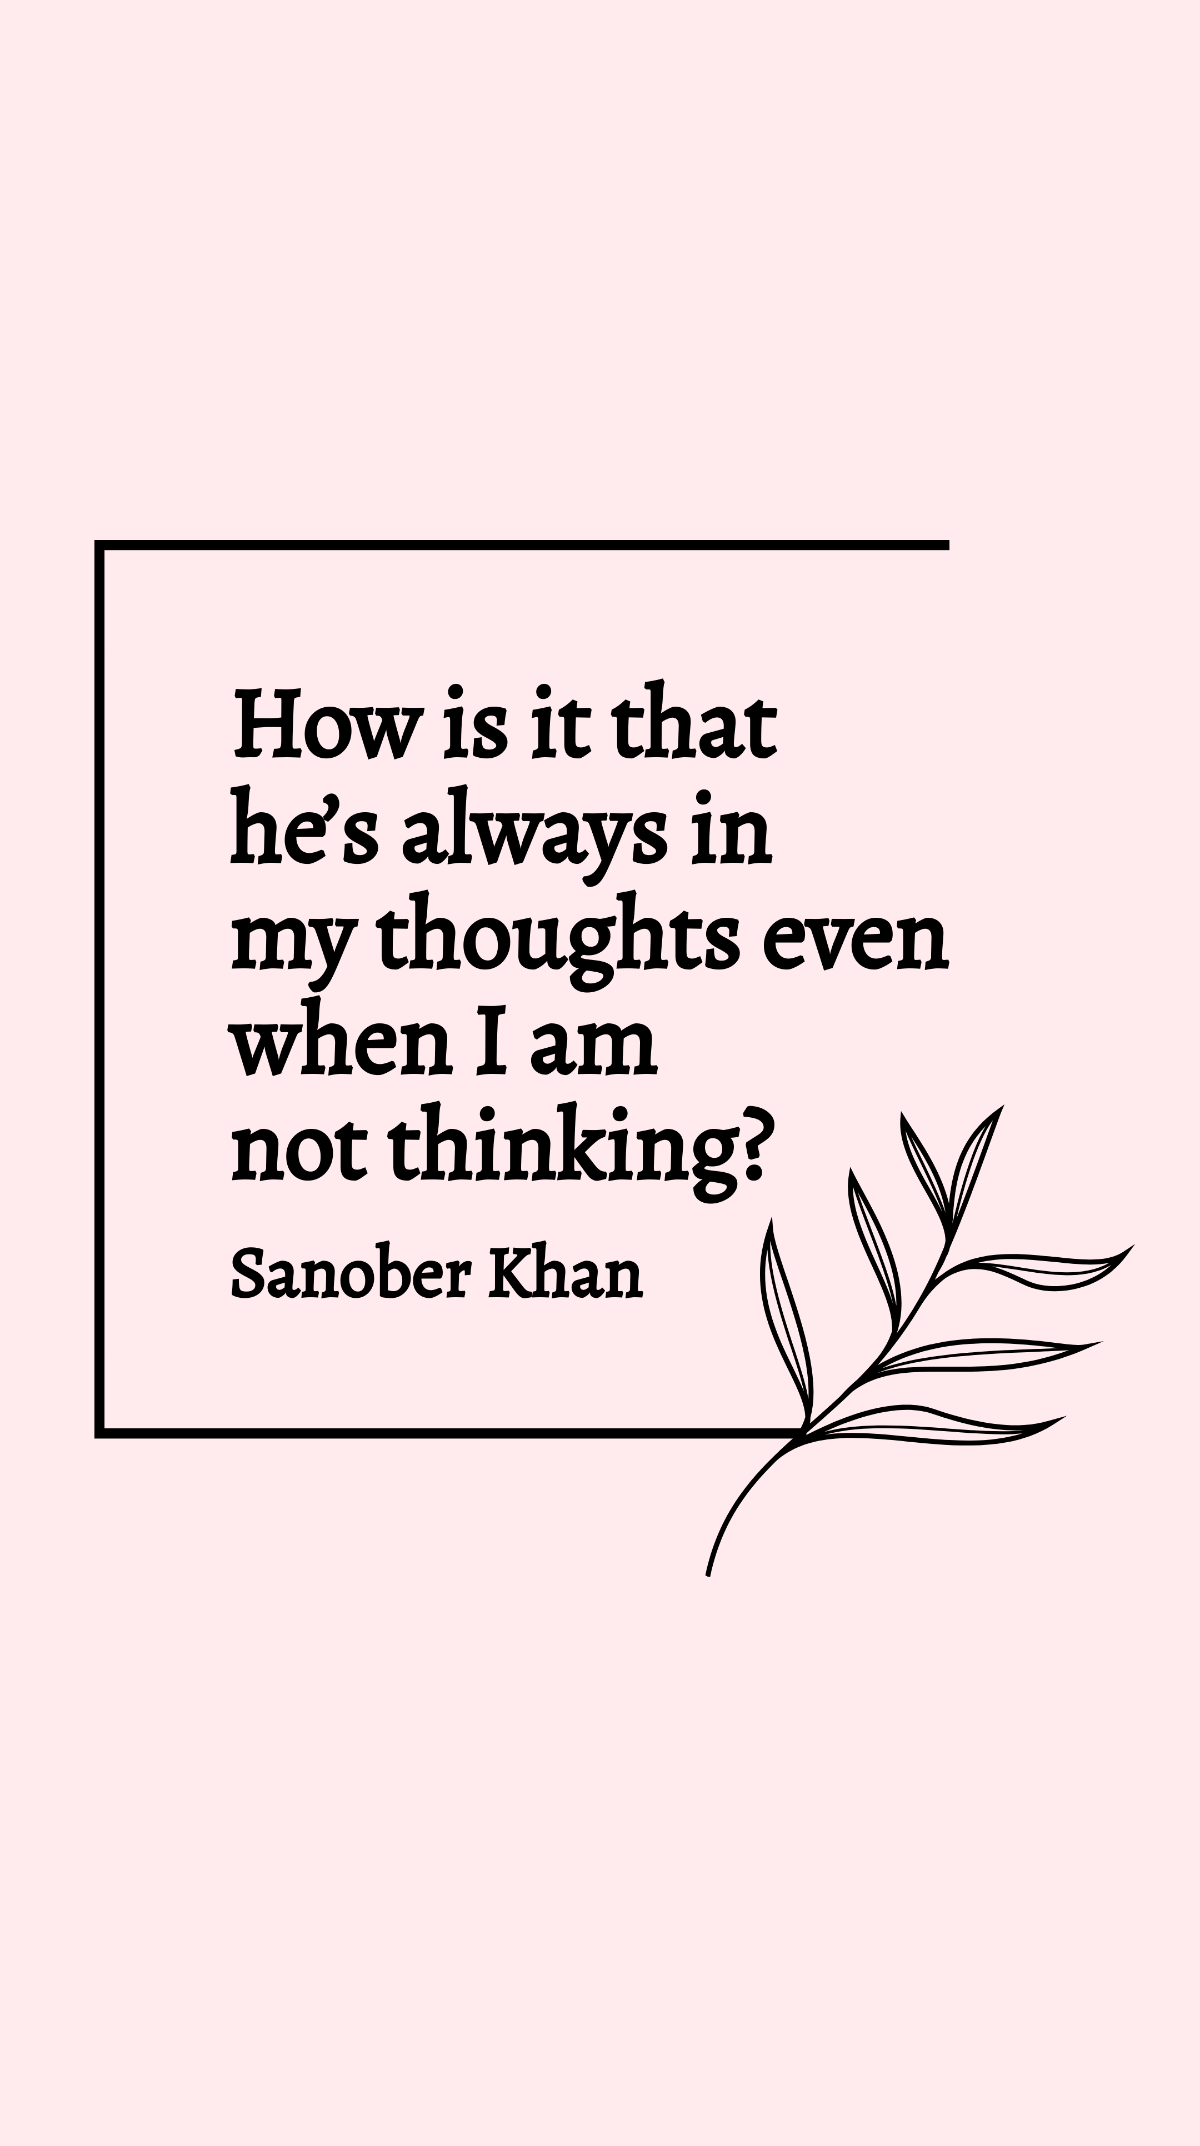 Sanober Khan - How is it that he’s always in my thoughts even when I am not thinking? Template